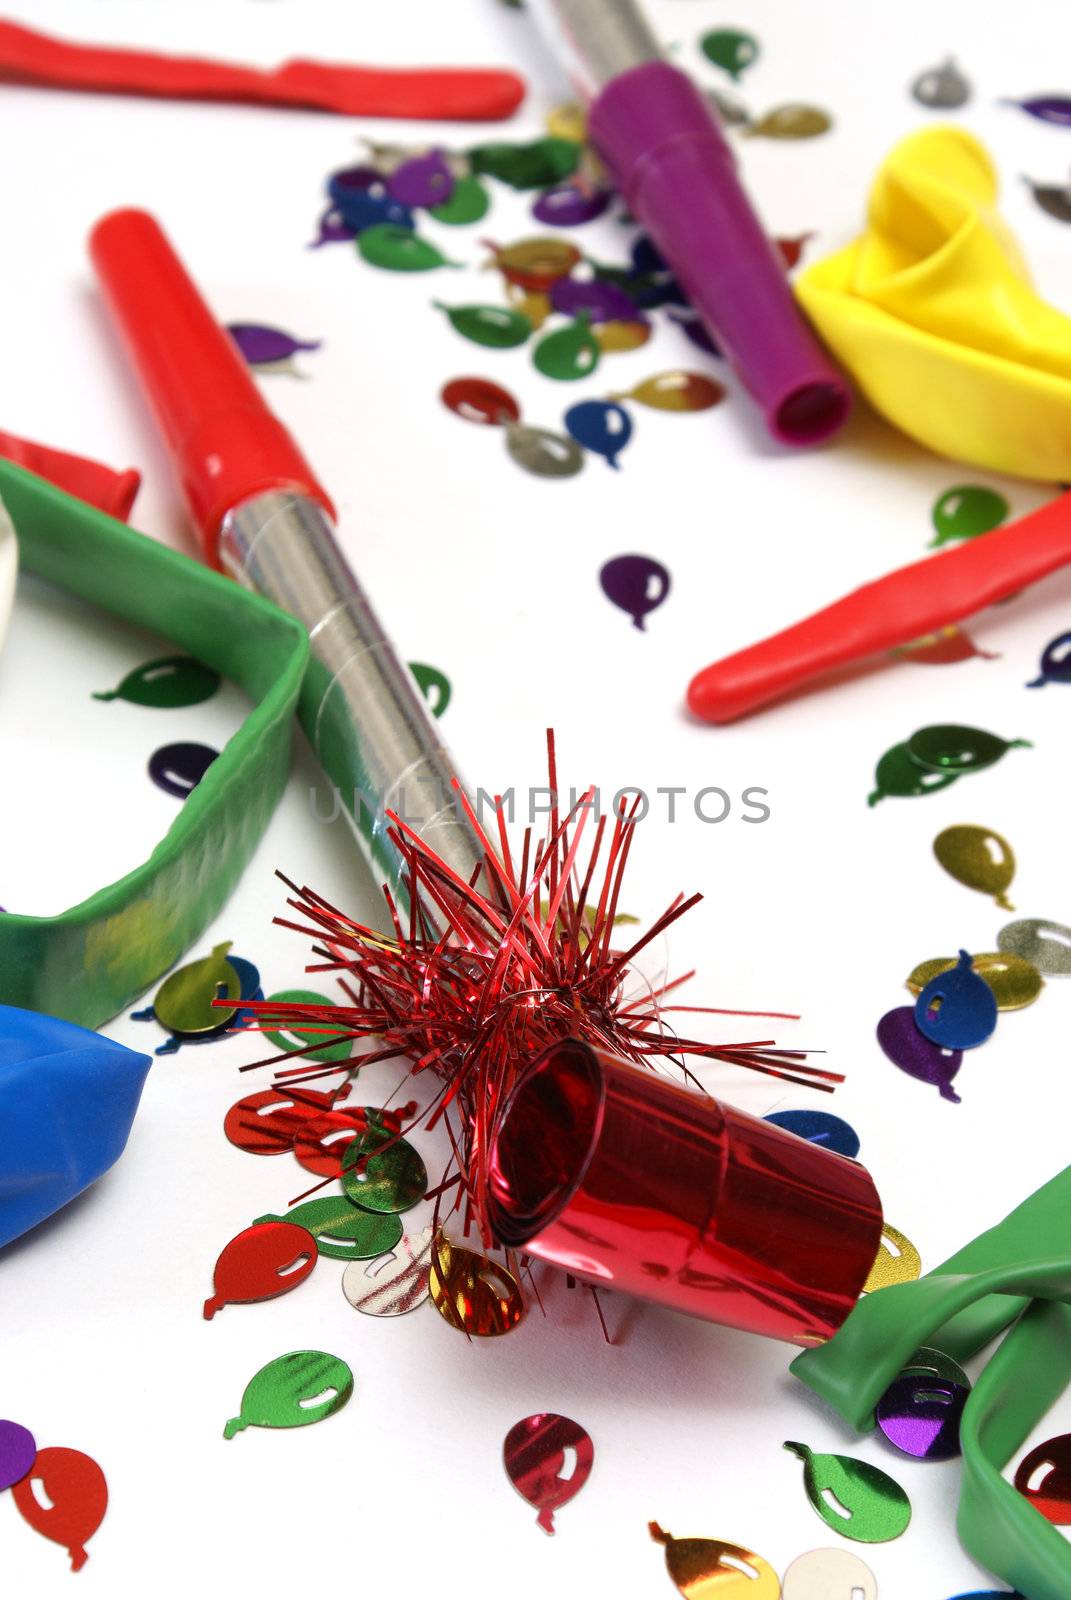 A red noise maker with confetti on a white background.